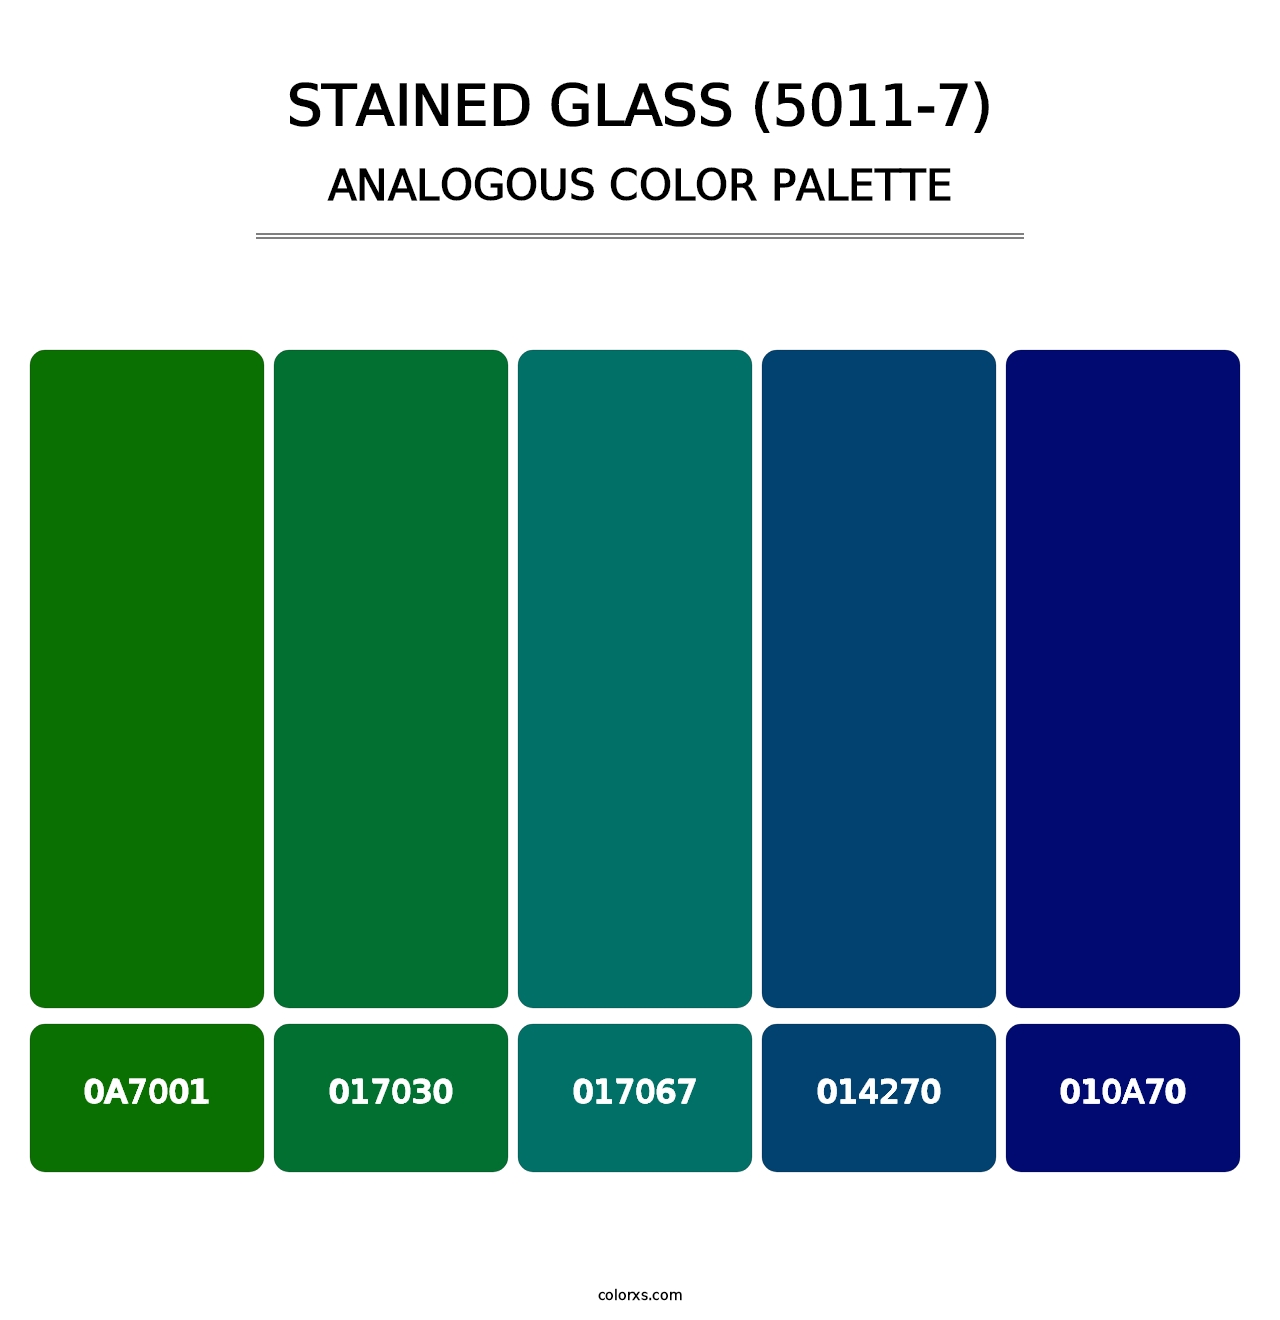 Stained Glass (5011-7) - Analogous Color Palette